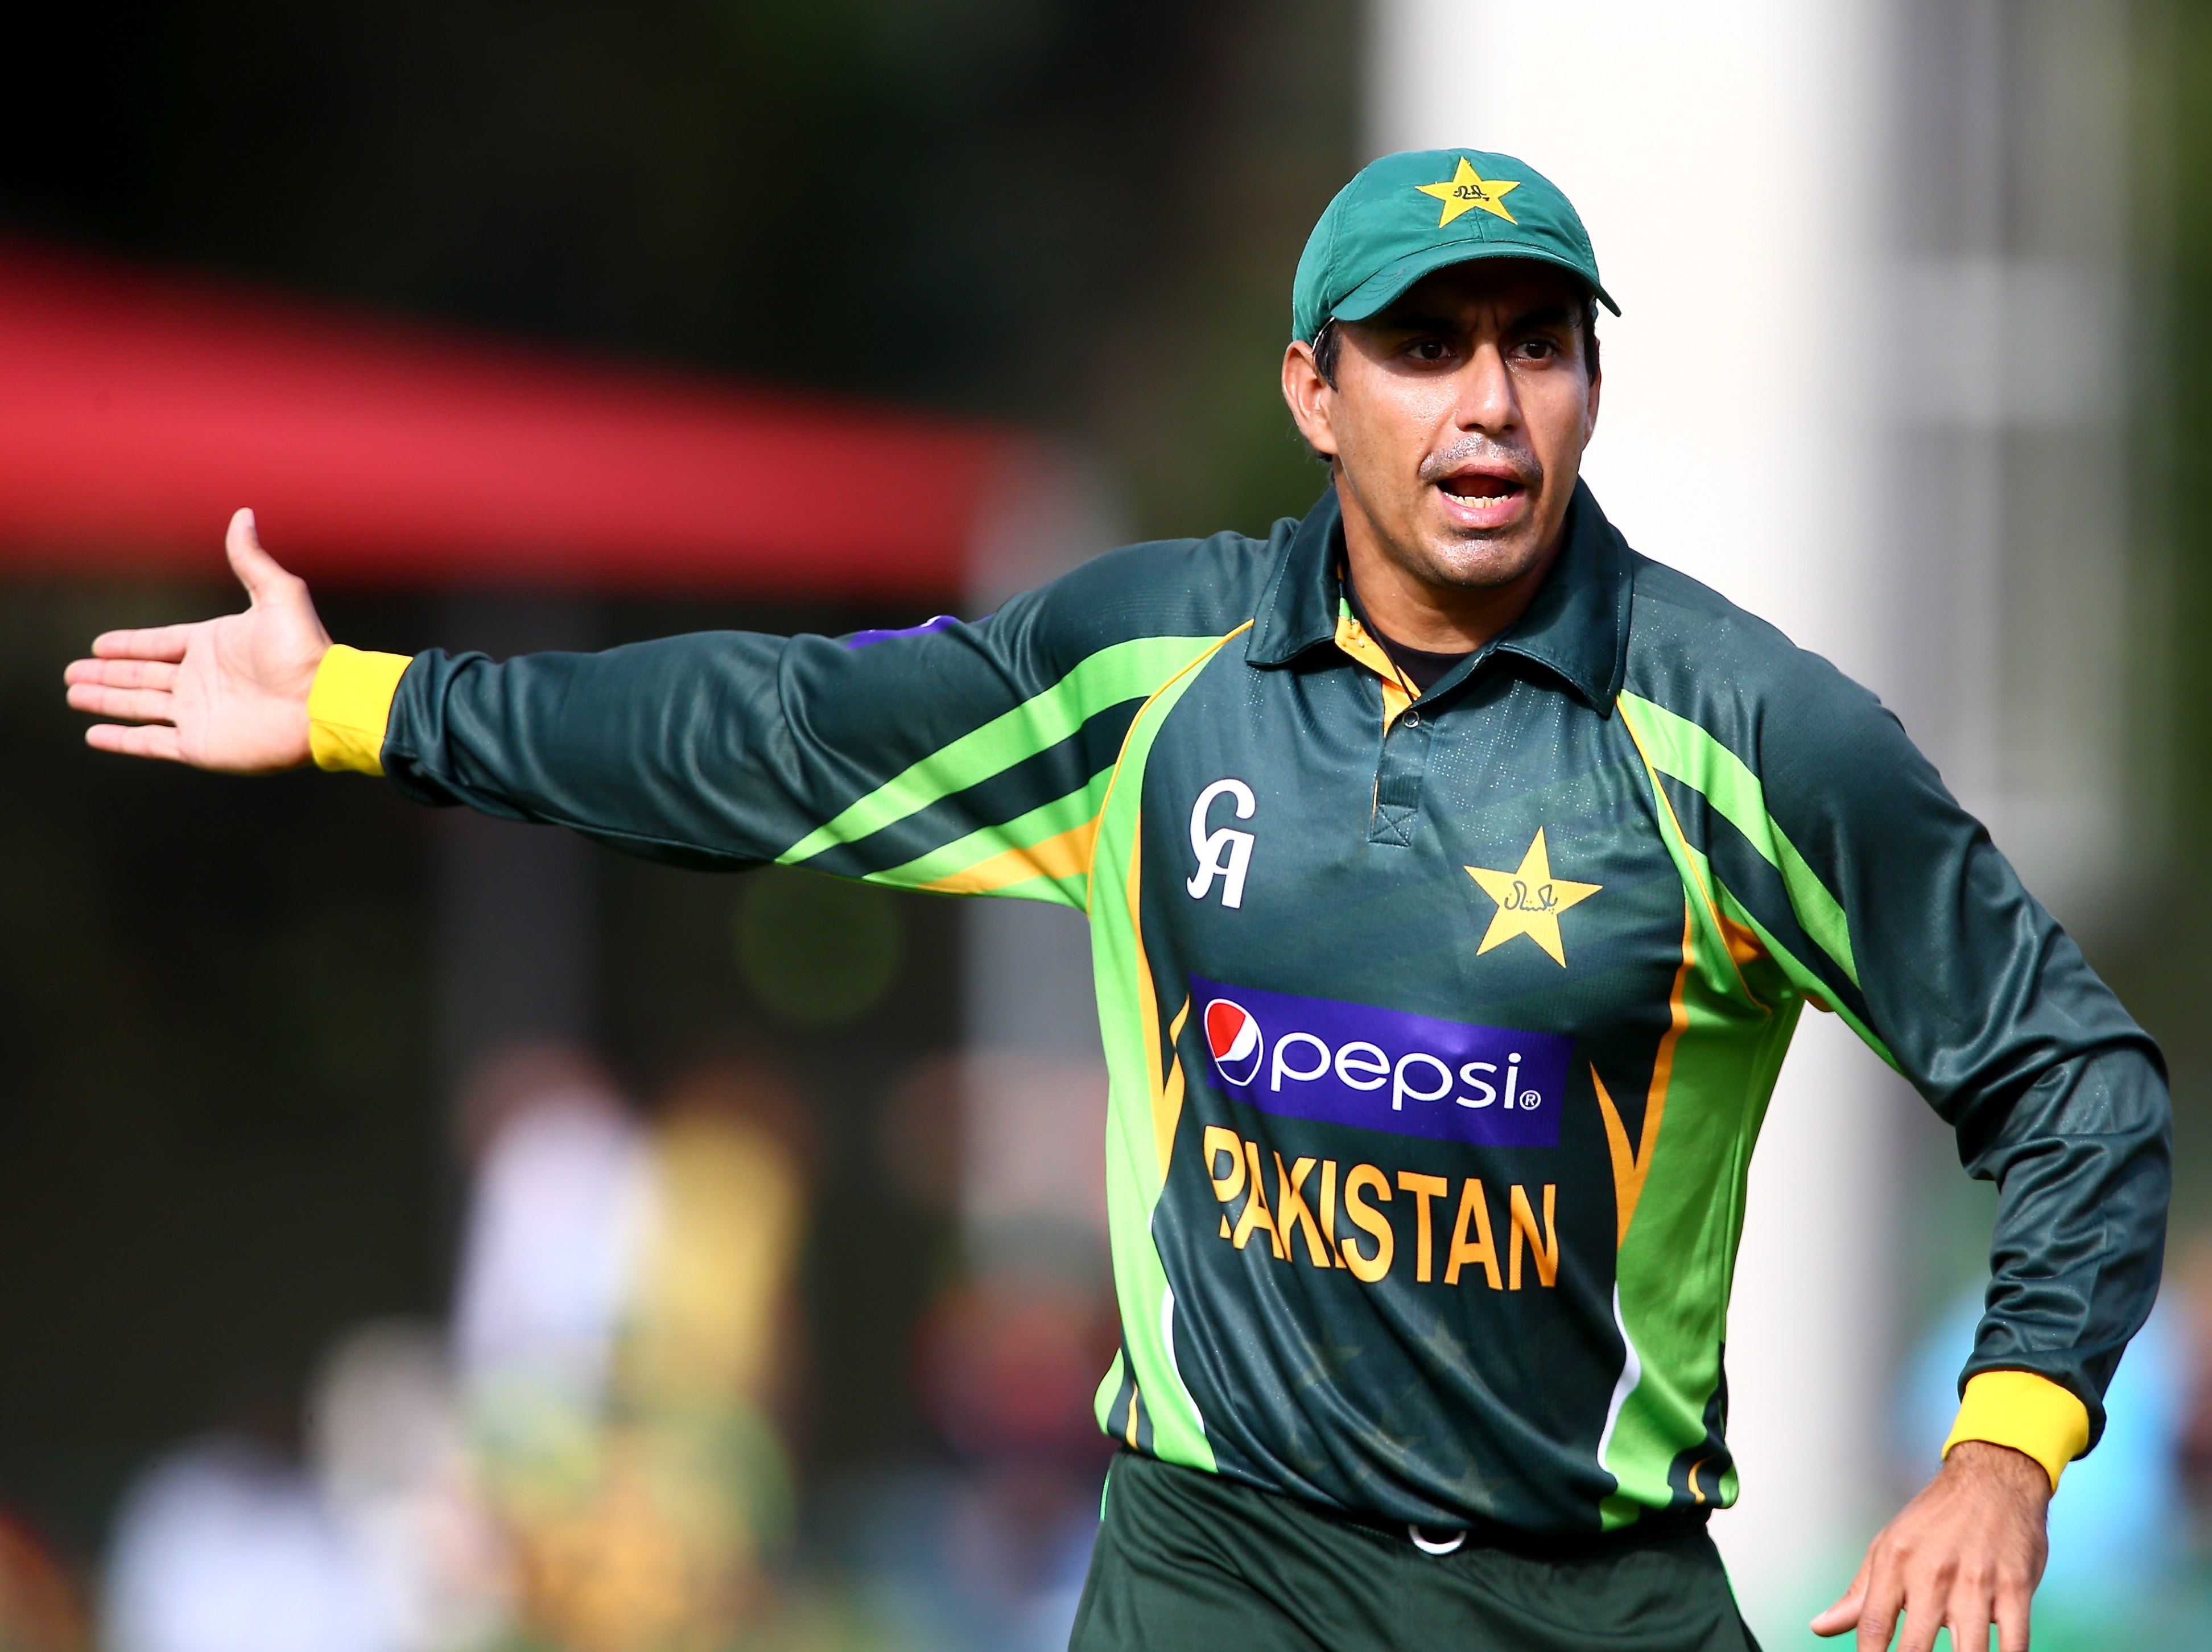 Nasir Jamshed jailed for 17 months for involvement in spot-fixing scandal